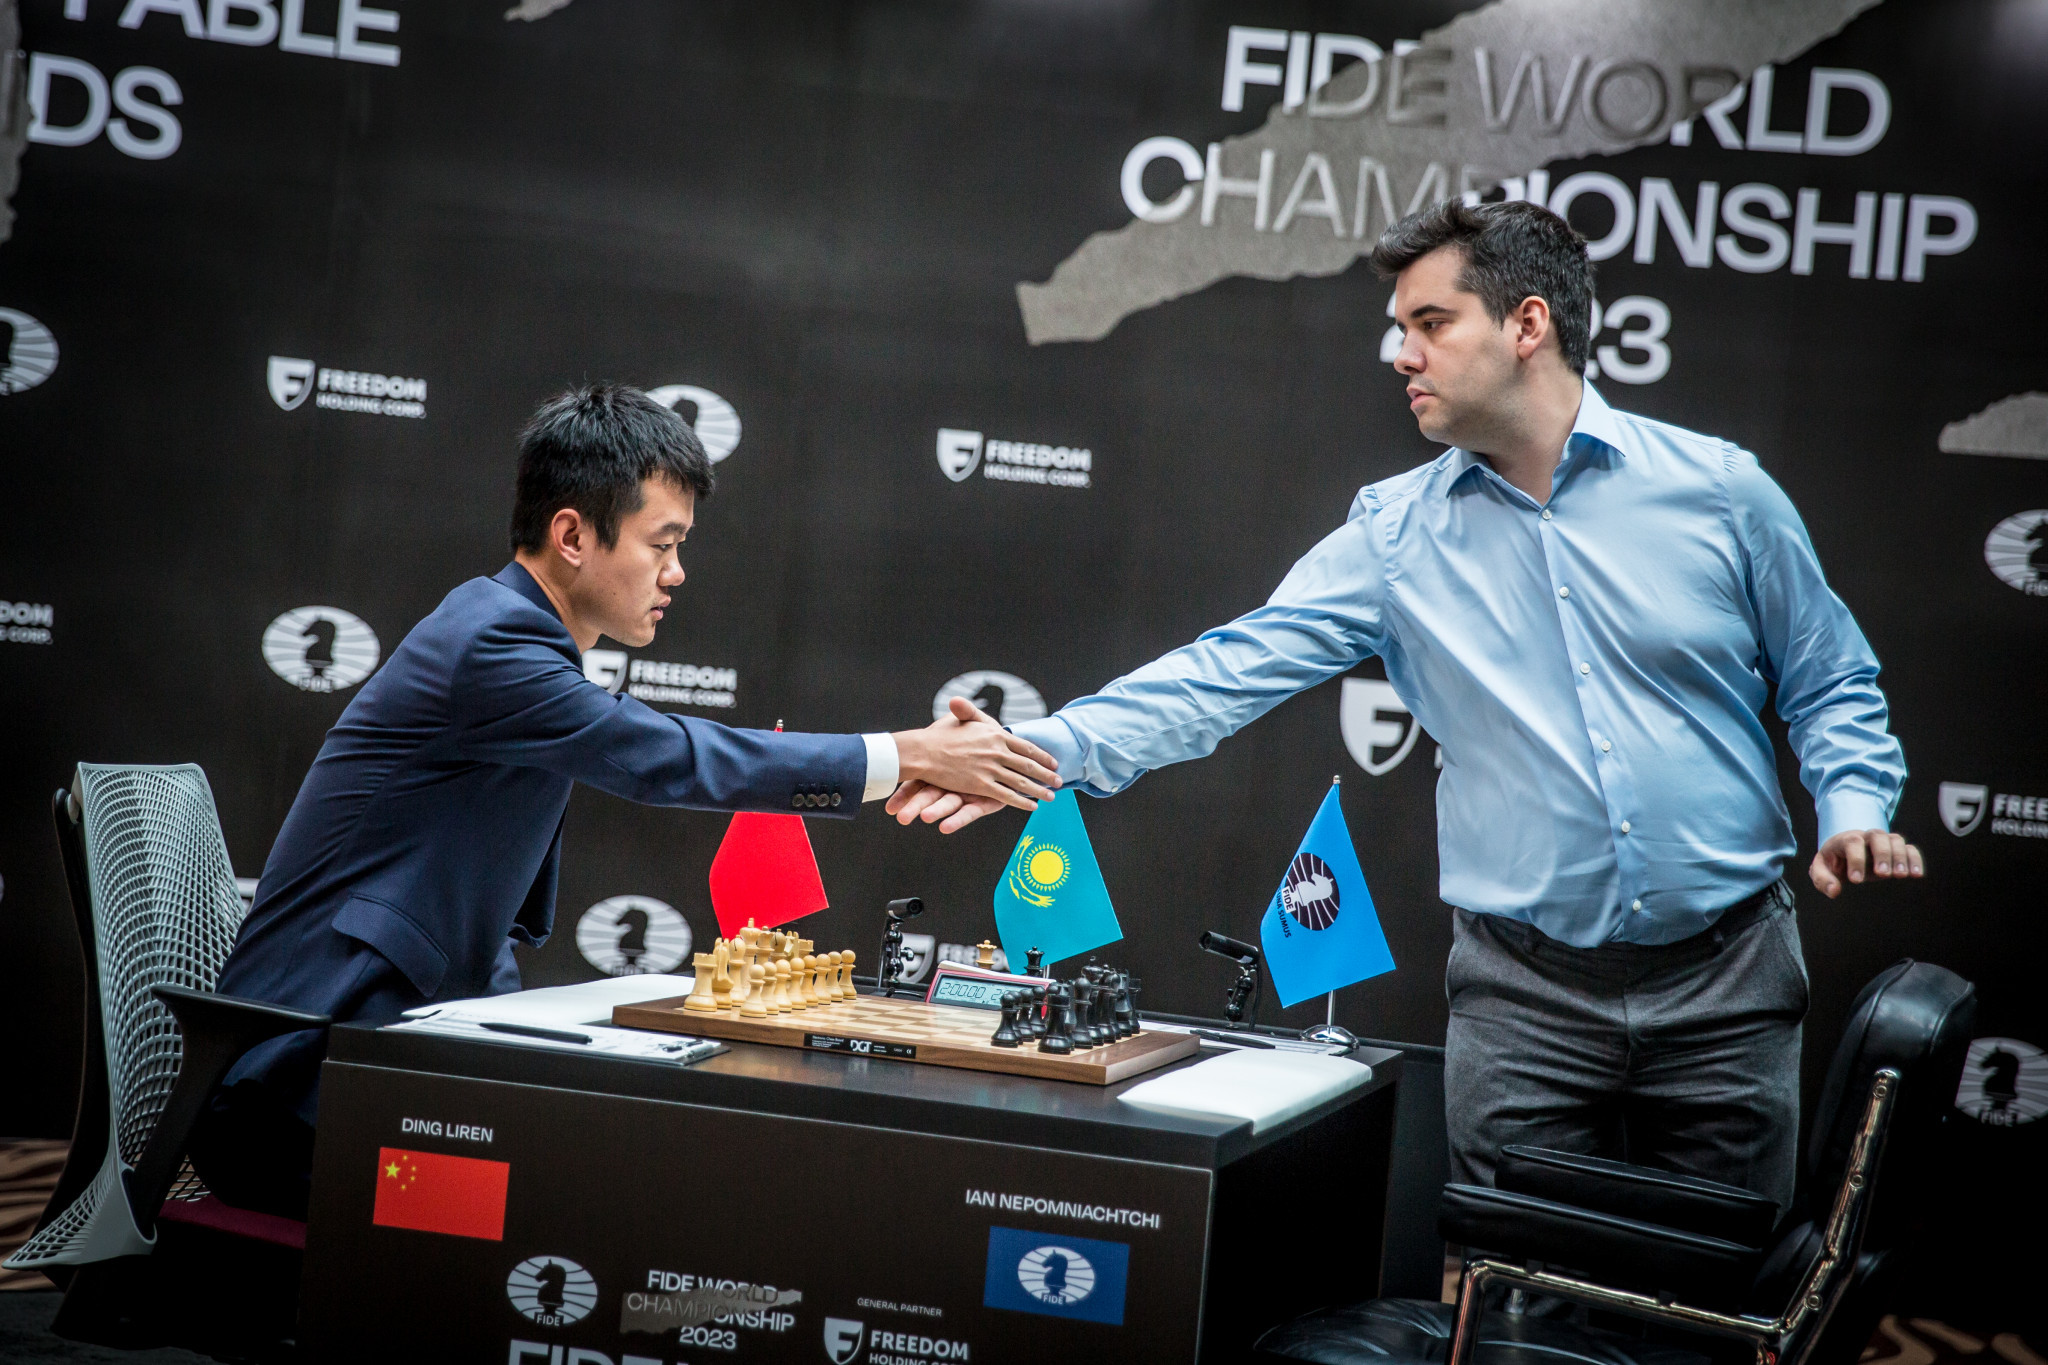 Ding holds Nepomniachtchi to force tiebreaks in FIDE World Championship Match